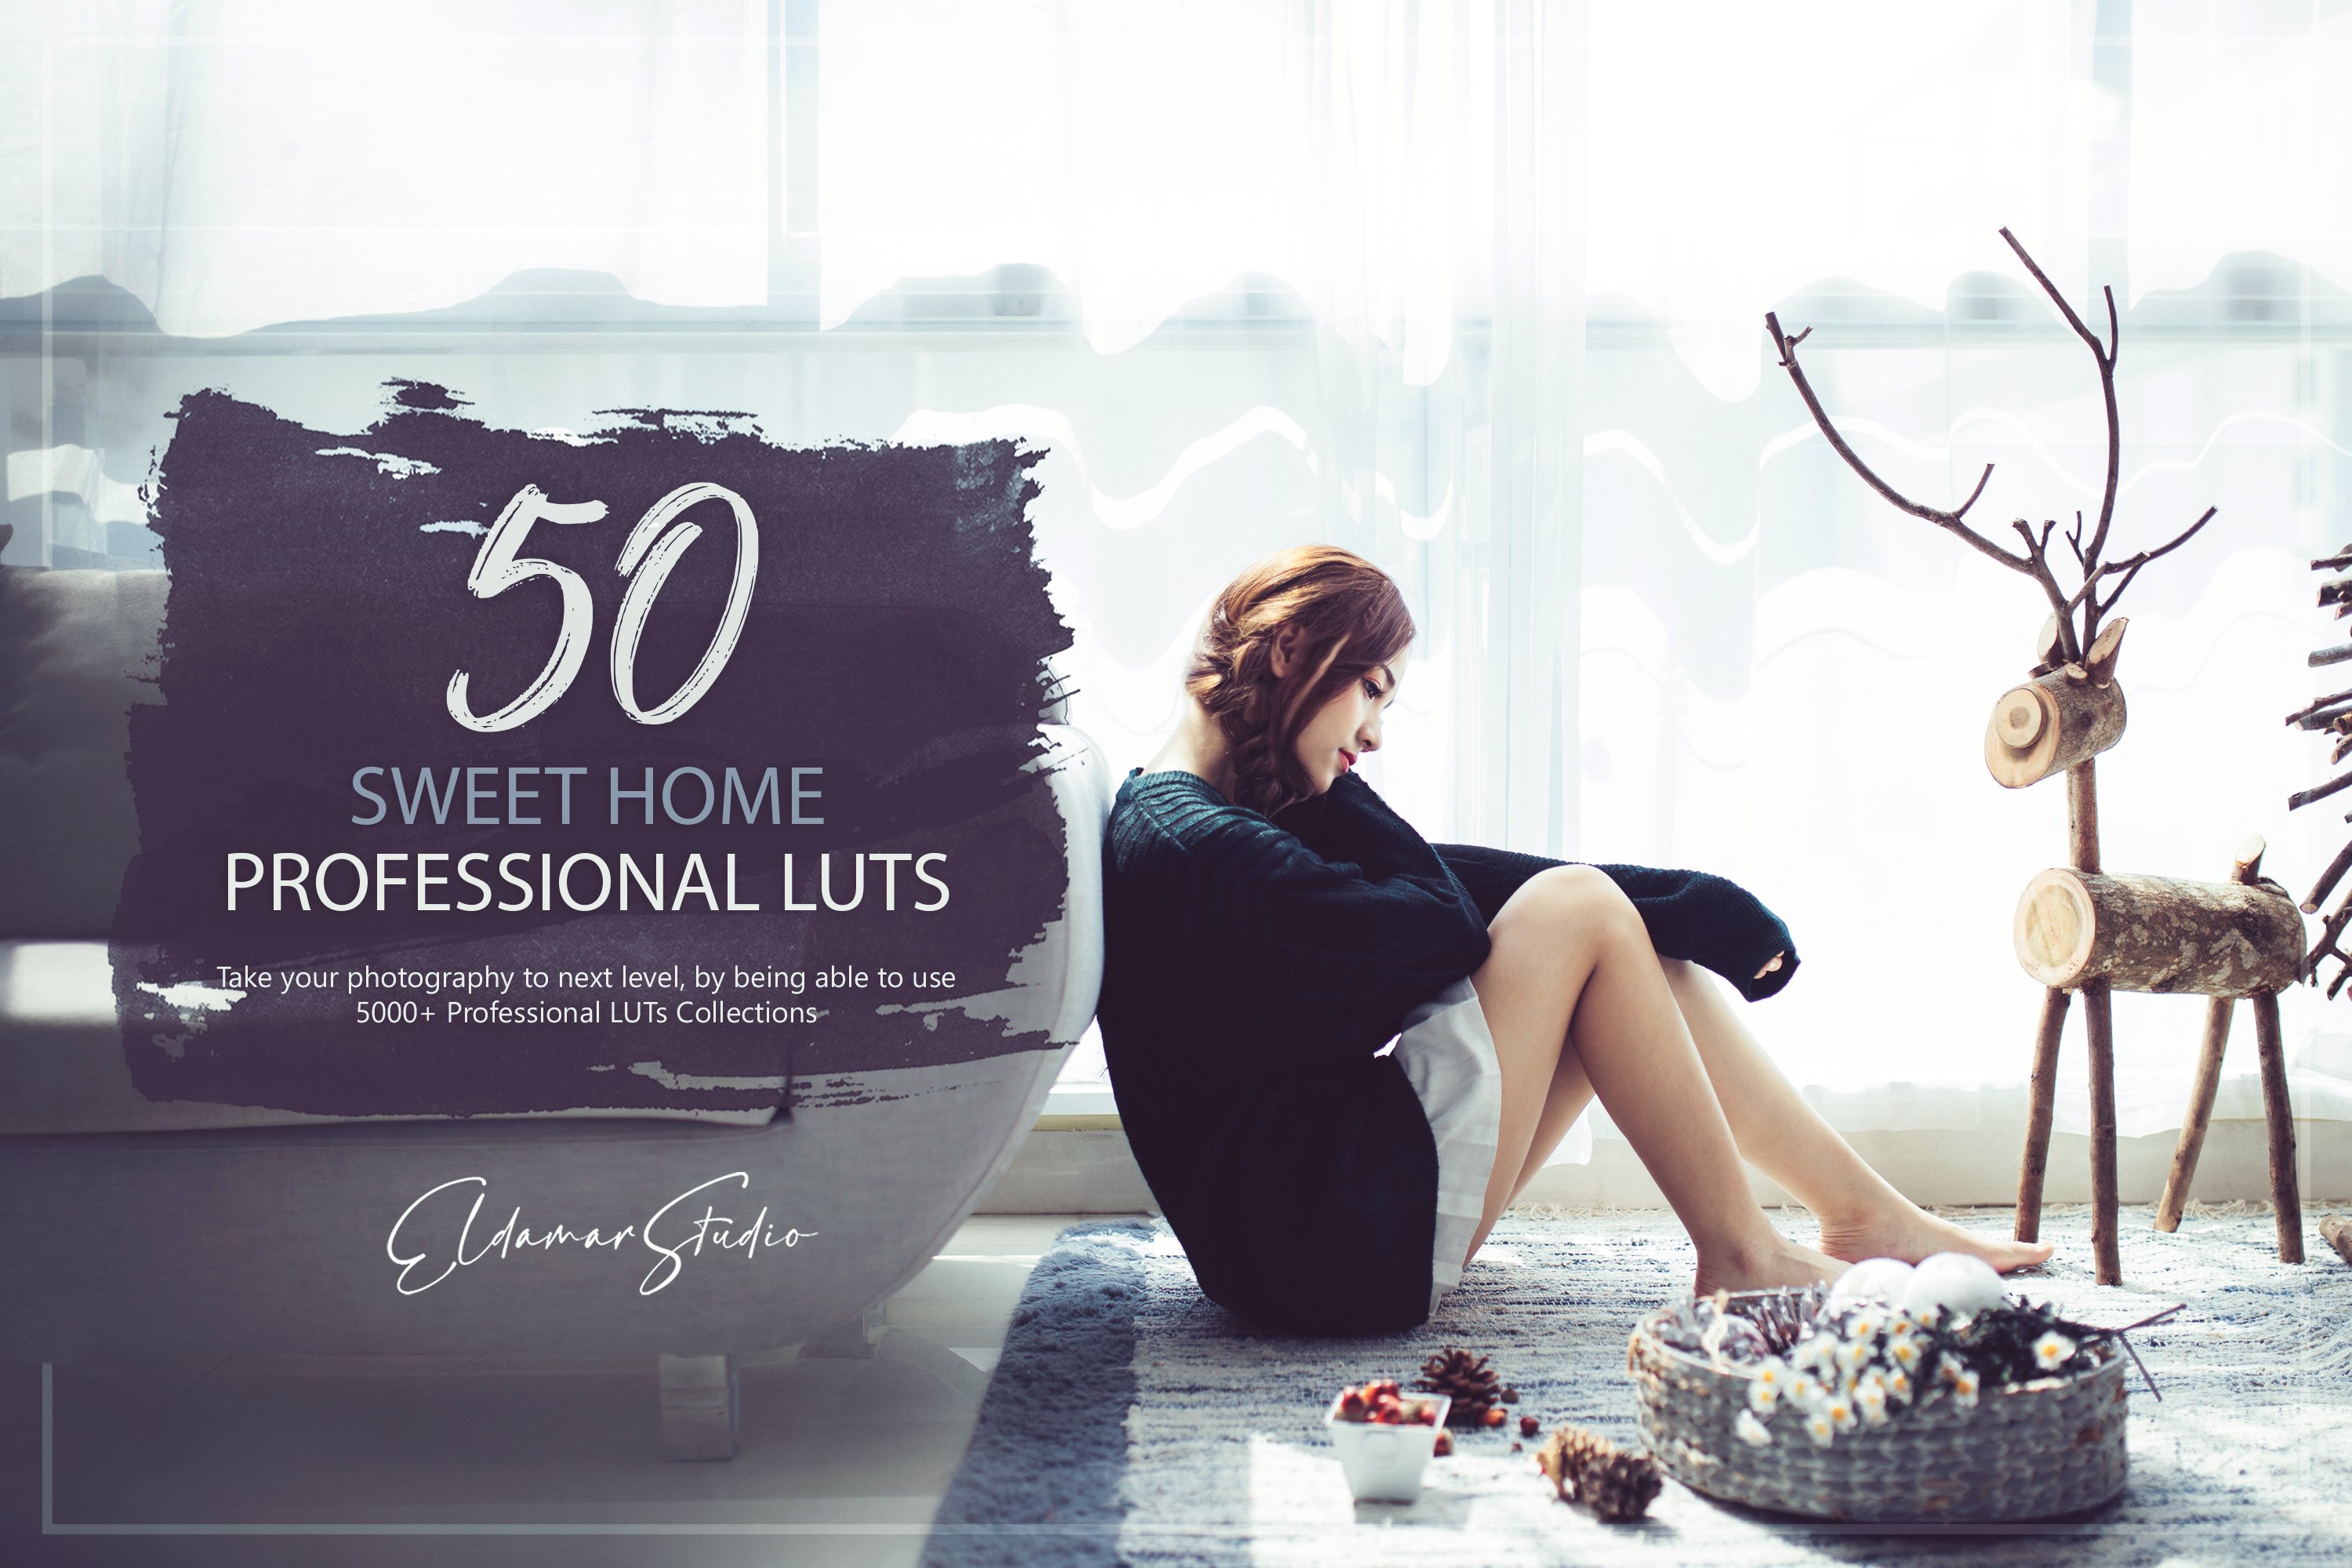 50 Sweet Home LUTs Packcover image.